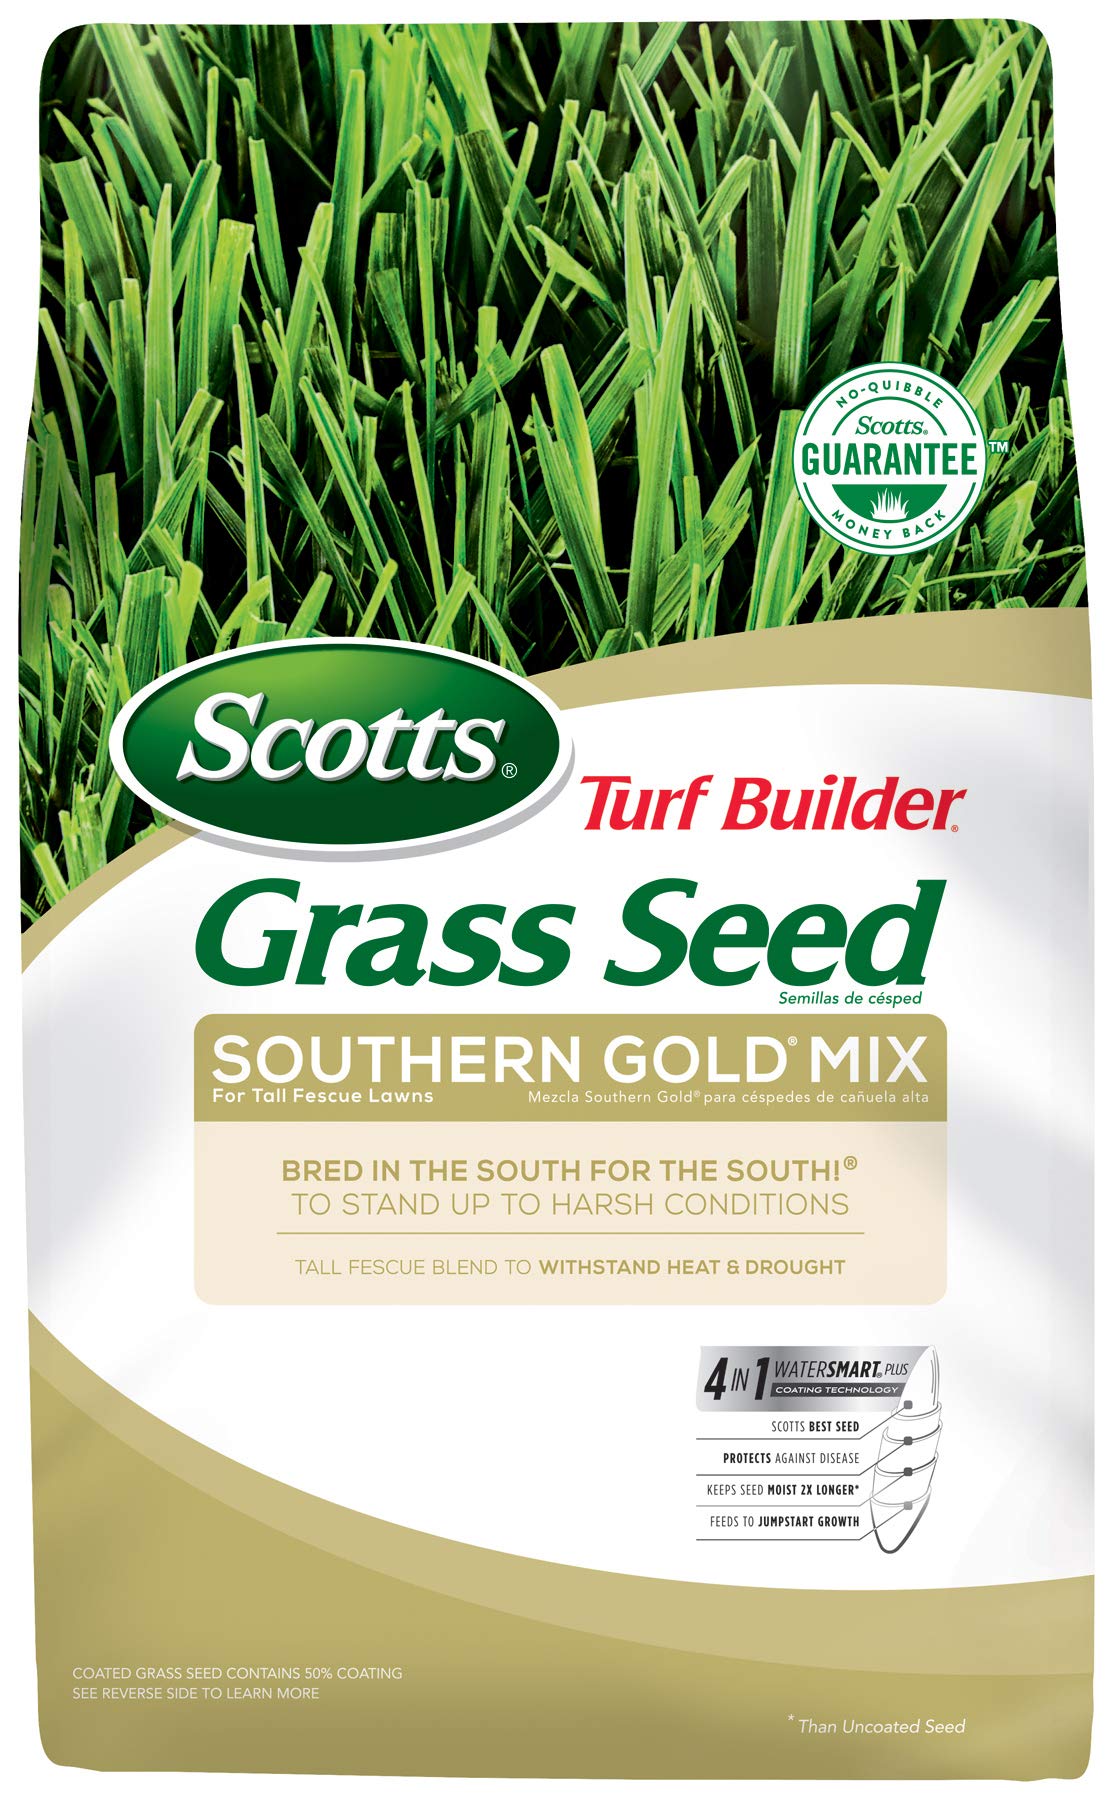 Scotts Turf Builder Grass Seed Southern Gold Mix for Tall Fescue Lawns to Stand Up to Harsh Conditions, 40 lbs